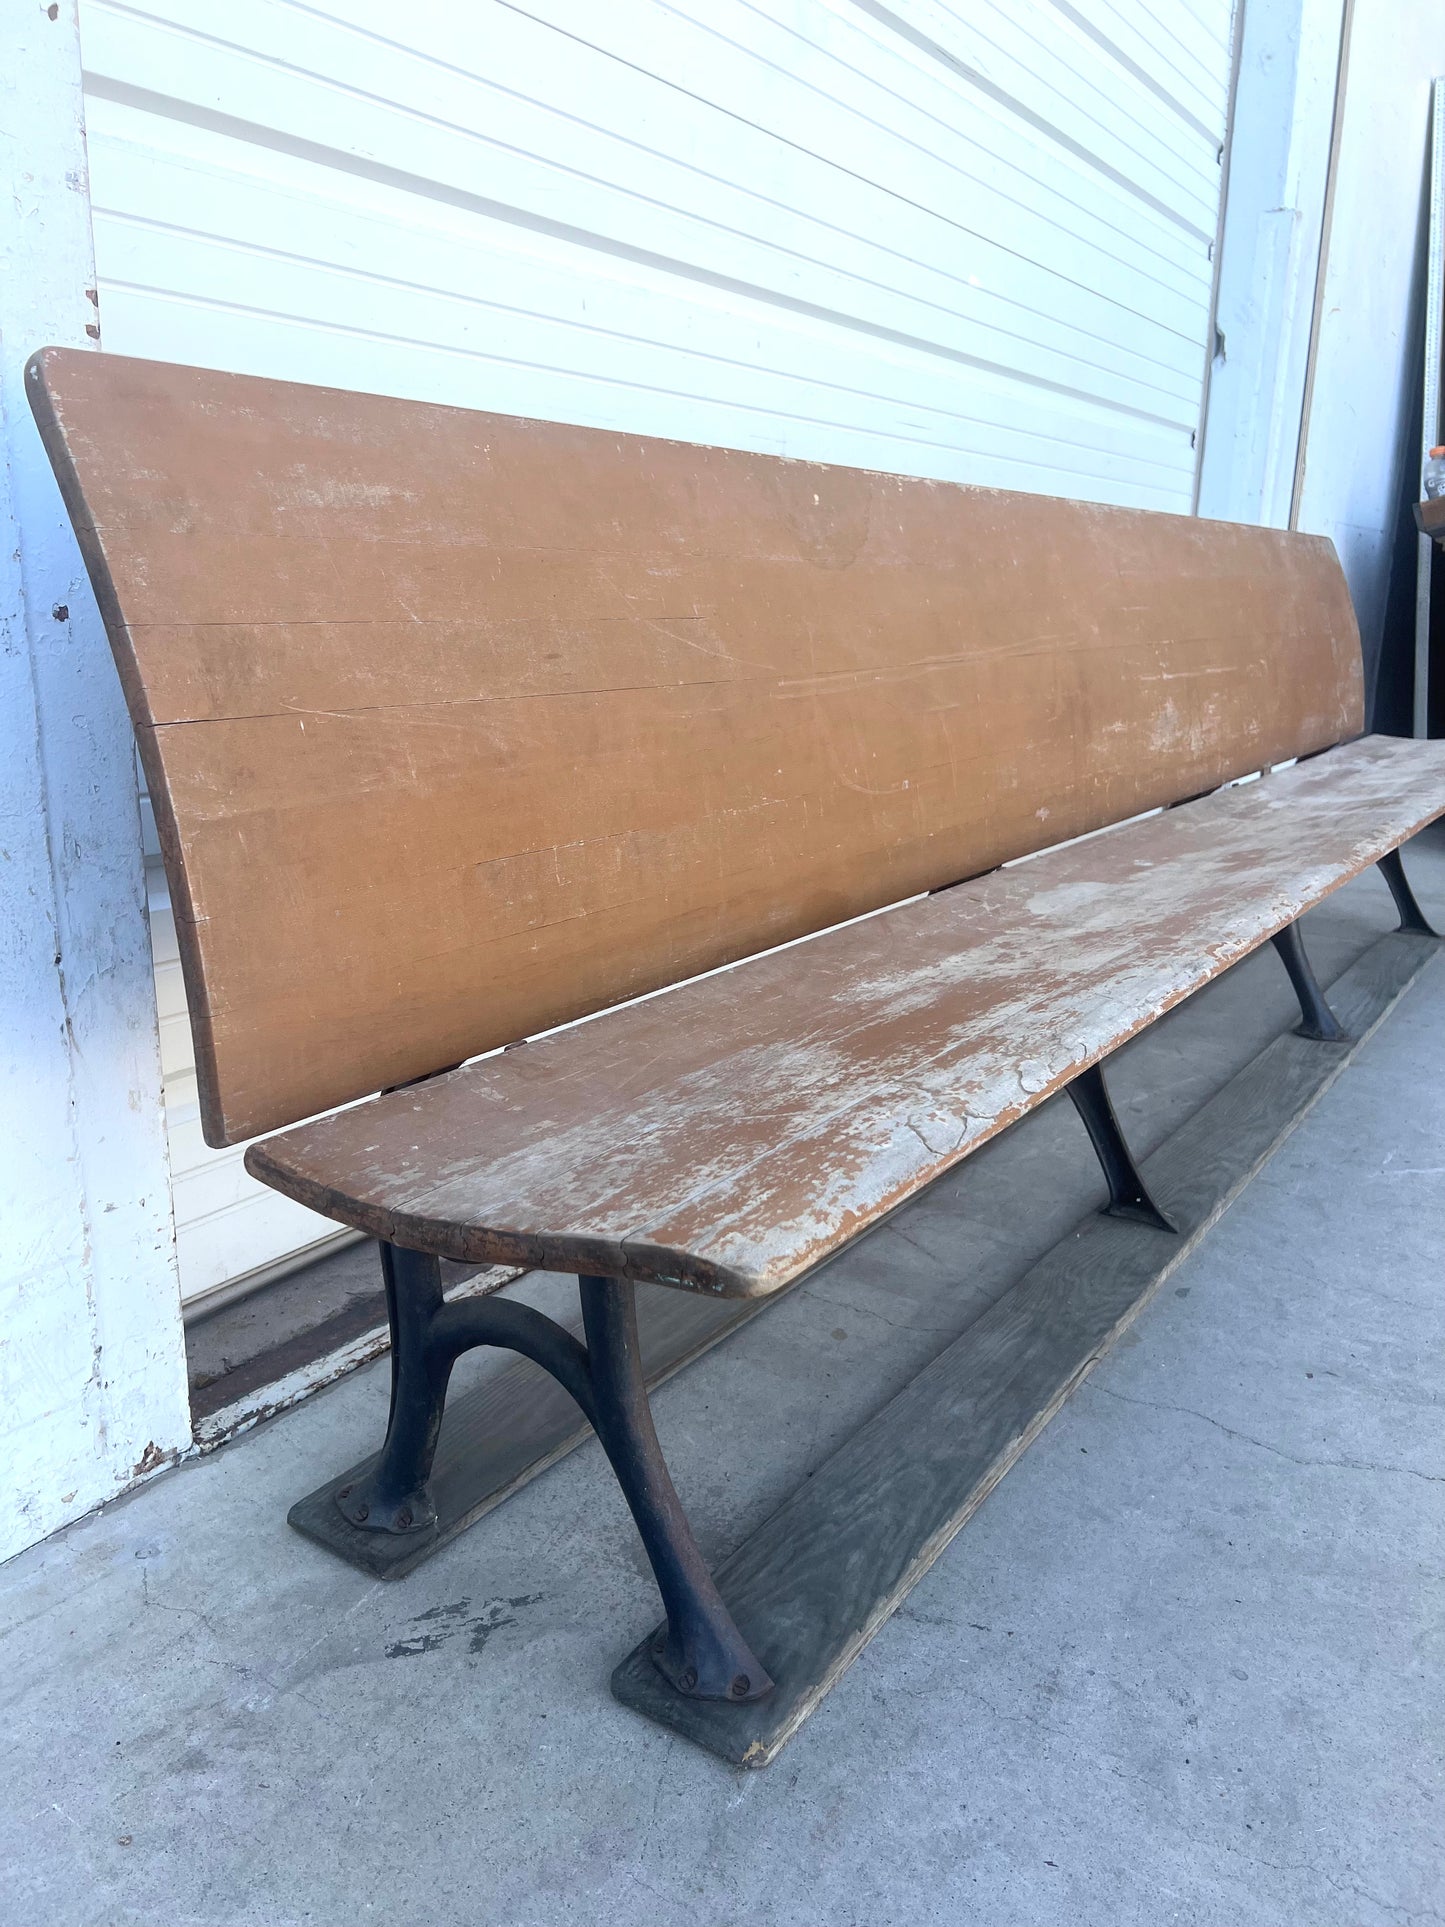 10 Ft Fold-up Bench with Cast Iron Legs